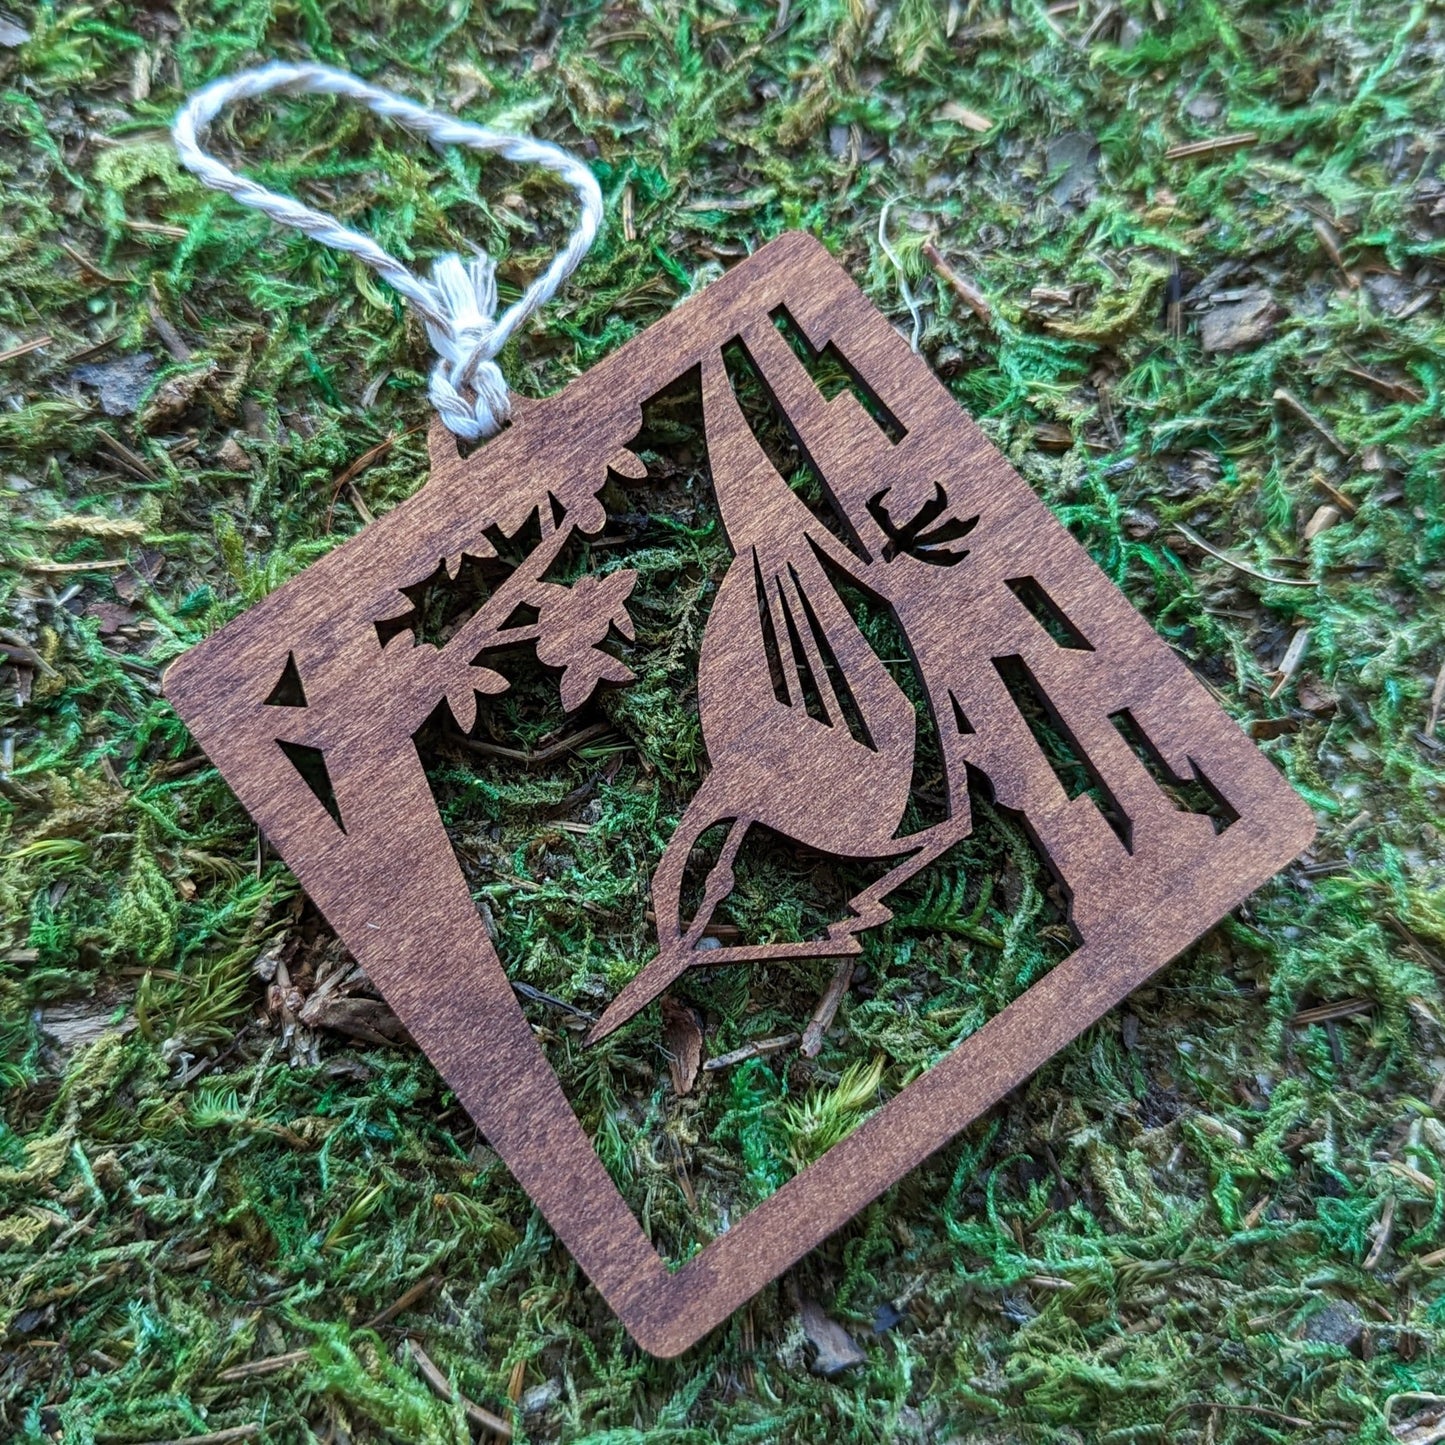 A wooden laser cut ornament of an opossum on a tree branch colored with brown wood dye on a mossy background.